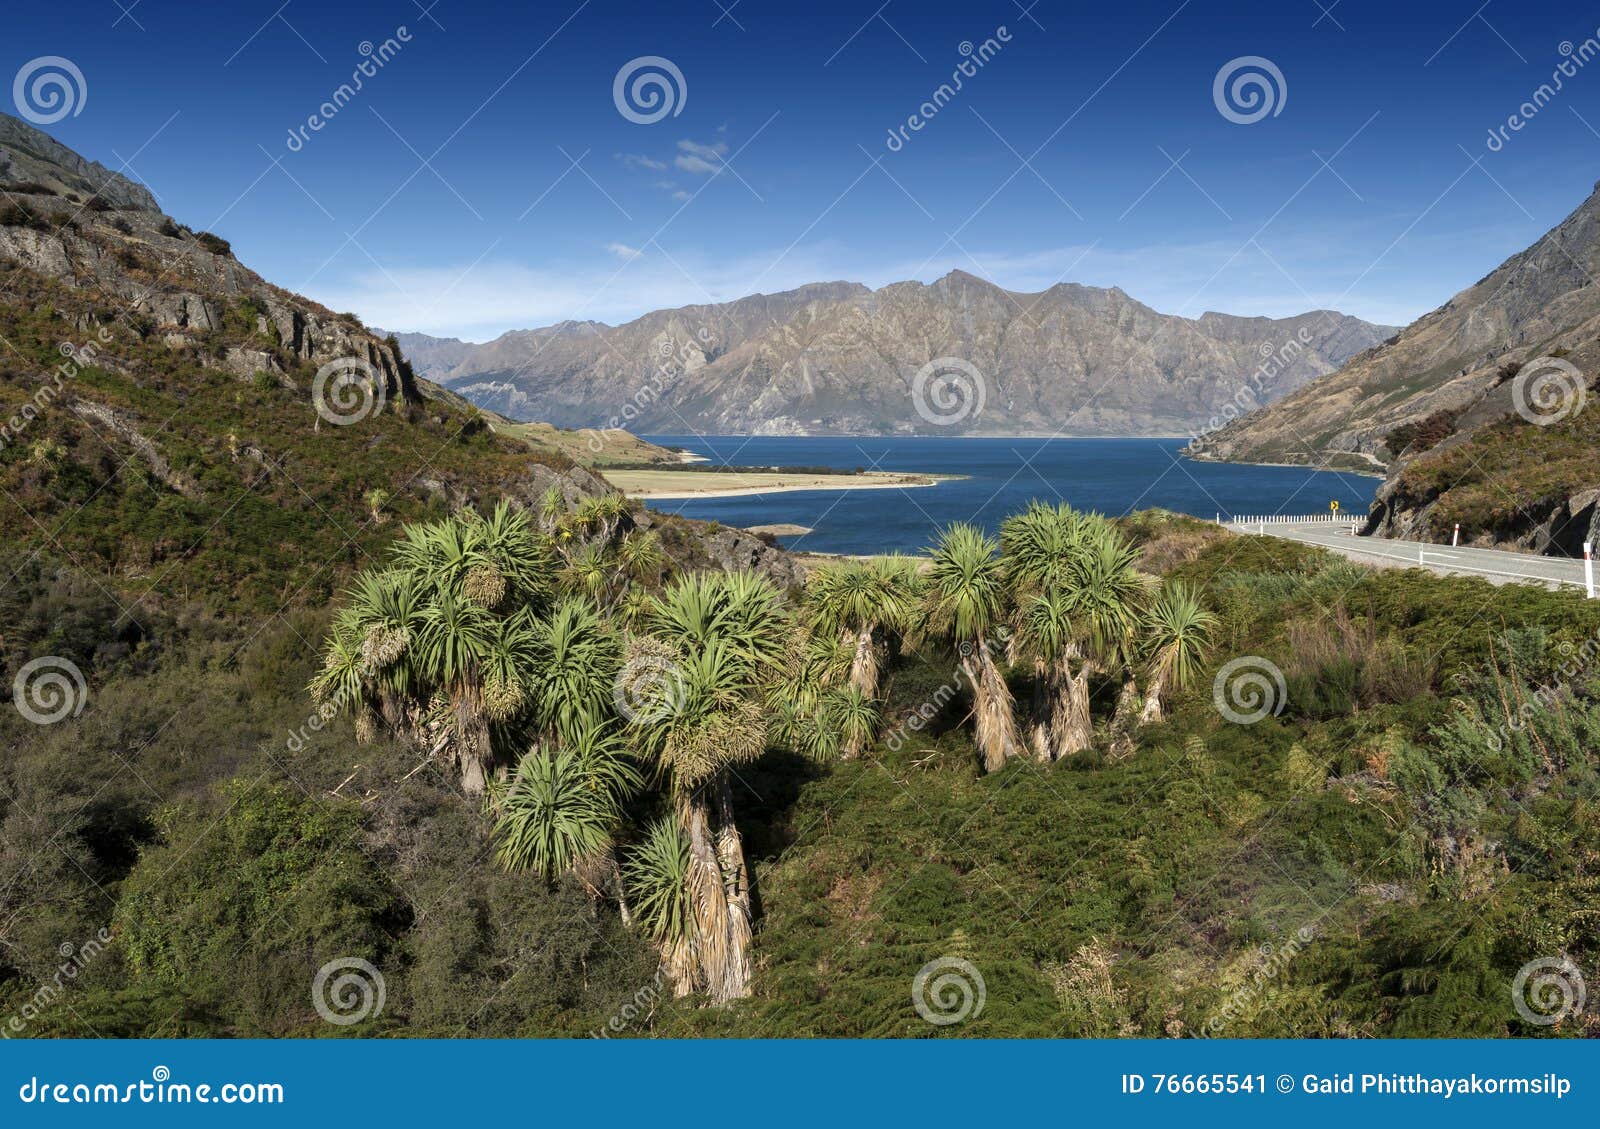 the neck, viewpoint of lake wanaka and lake hawea, new zealand at their closest point